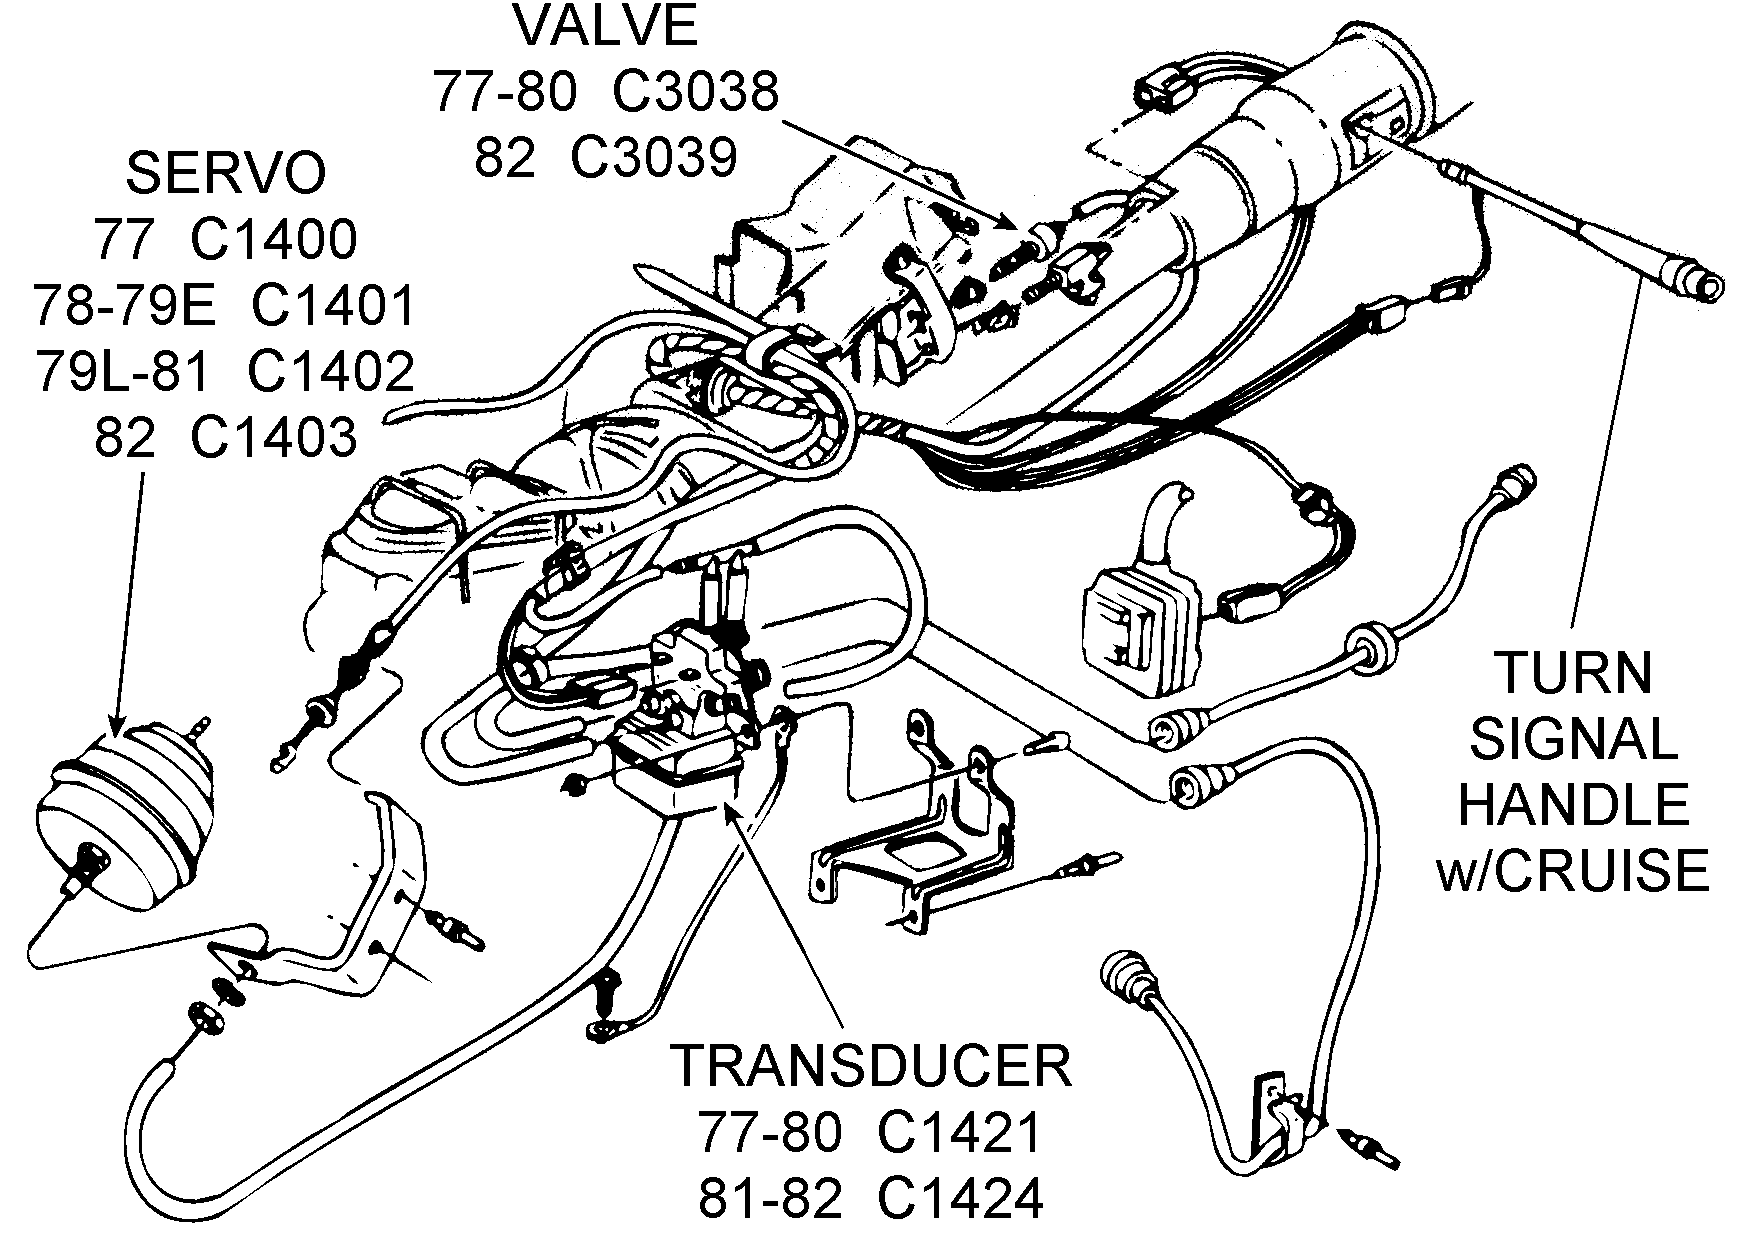 Cruise control Vac Drawing for 1982 with Resume ... 1995 lt1 wiring harness diagram schematic 